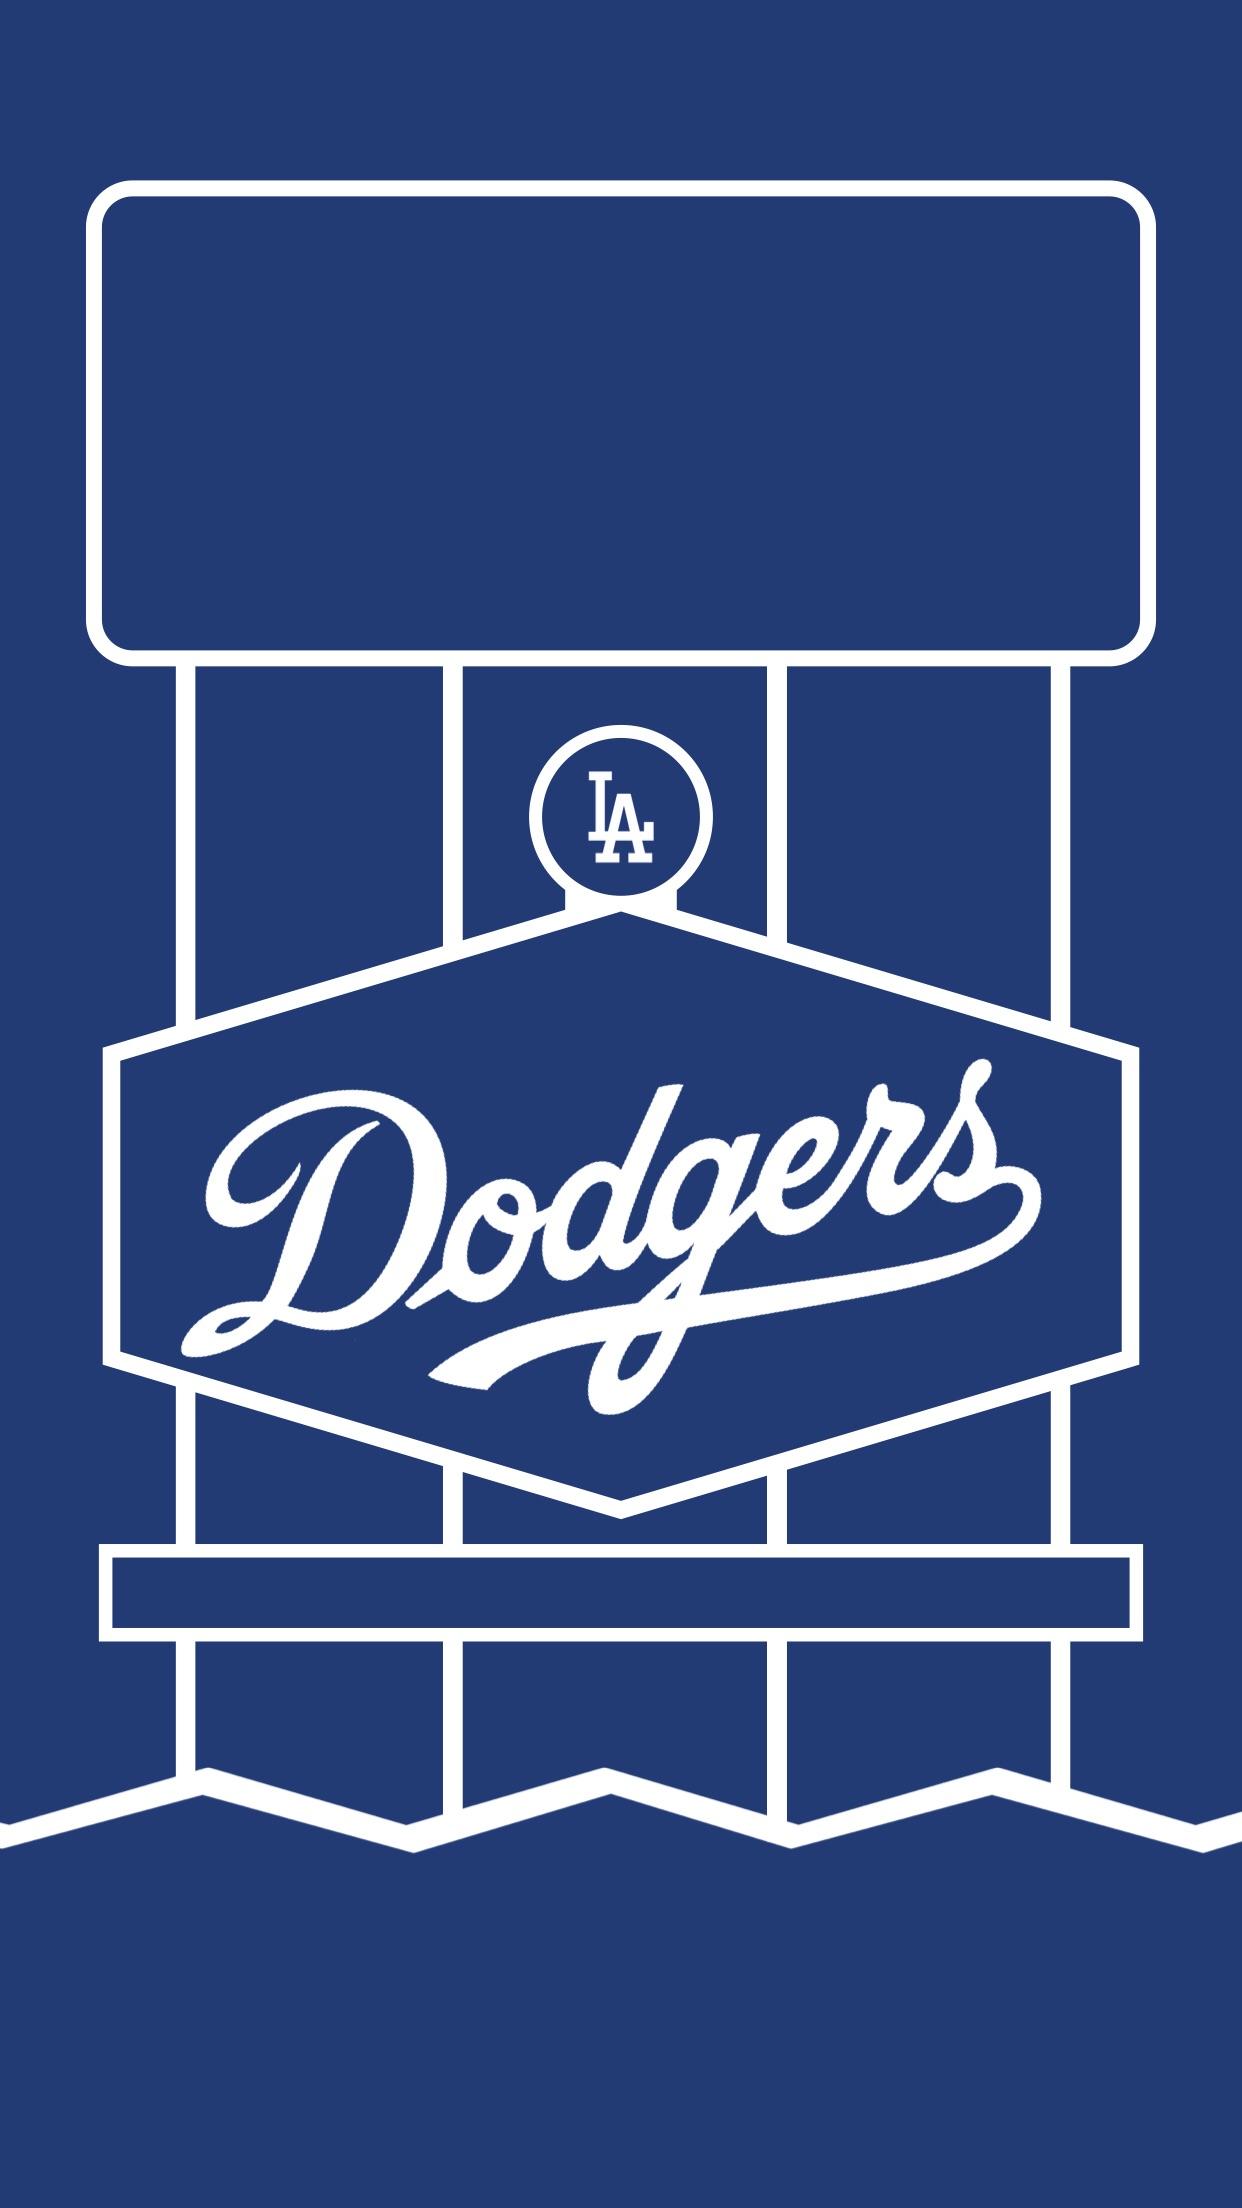 minimal dodger iPhone wallpaper I made! The time and date fit